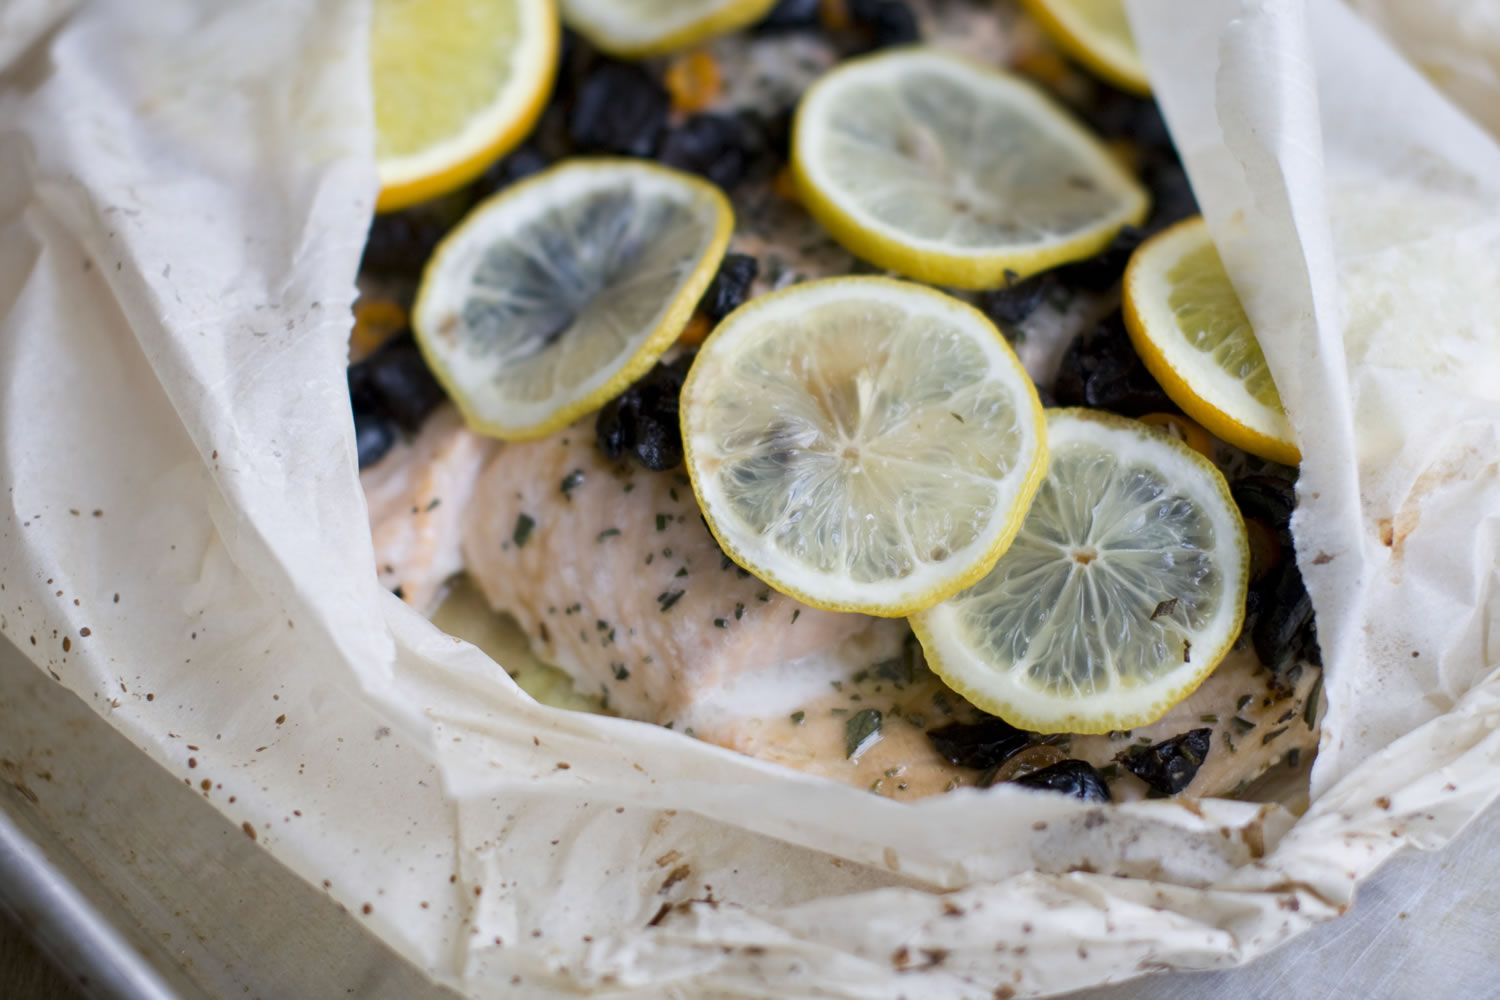 In the bag: cooking en papillote